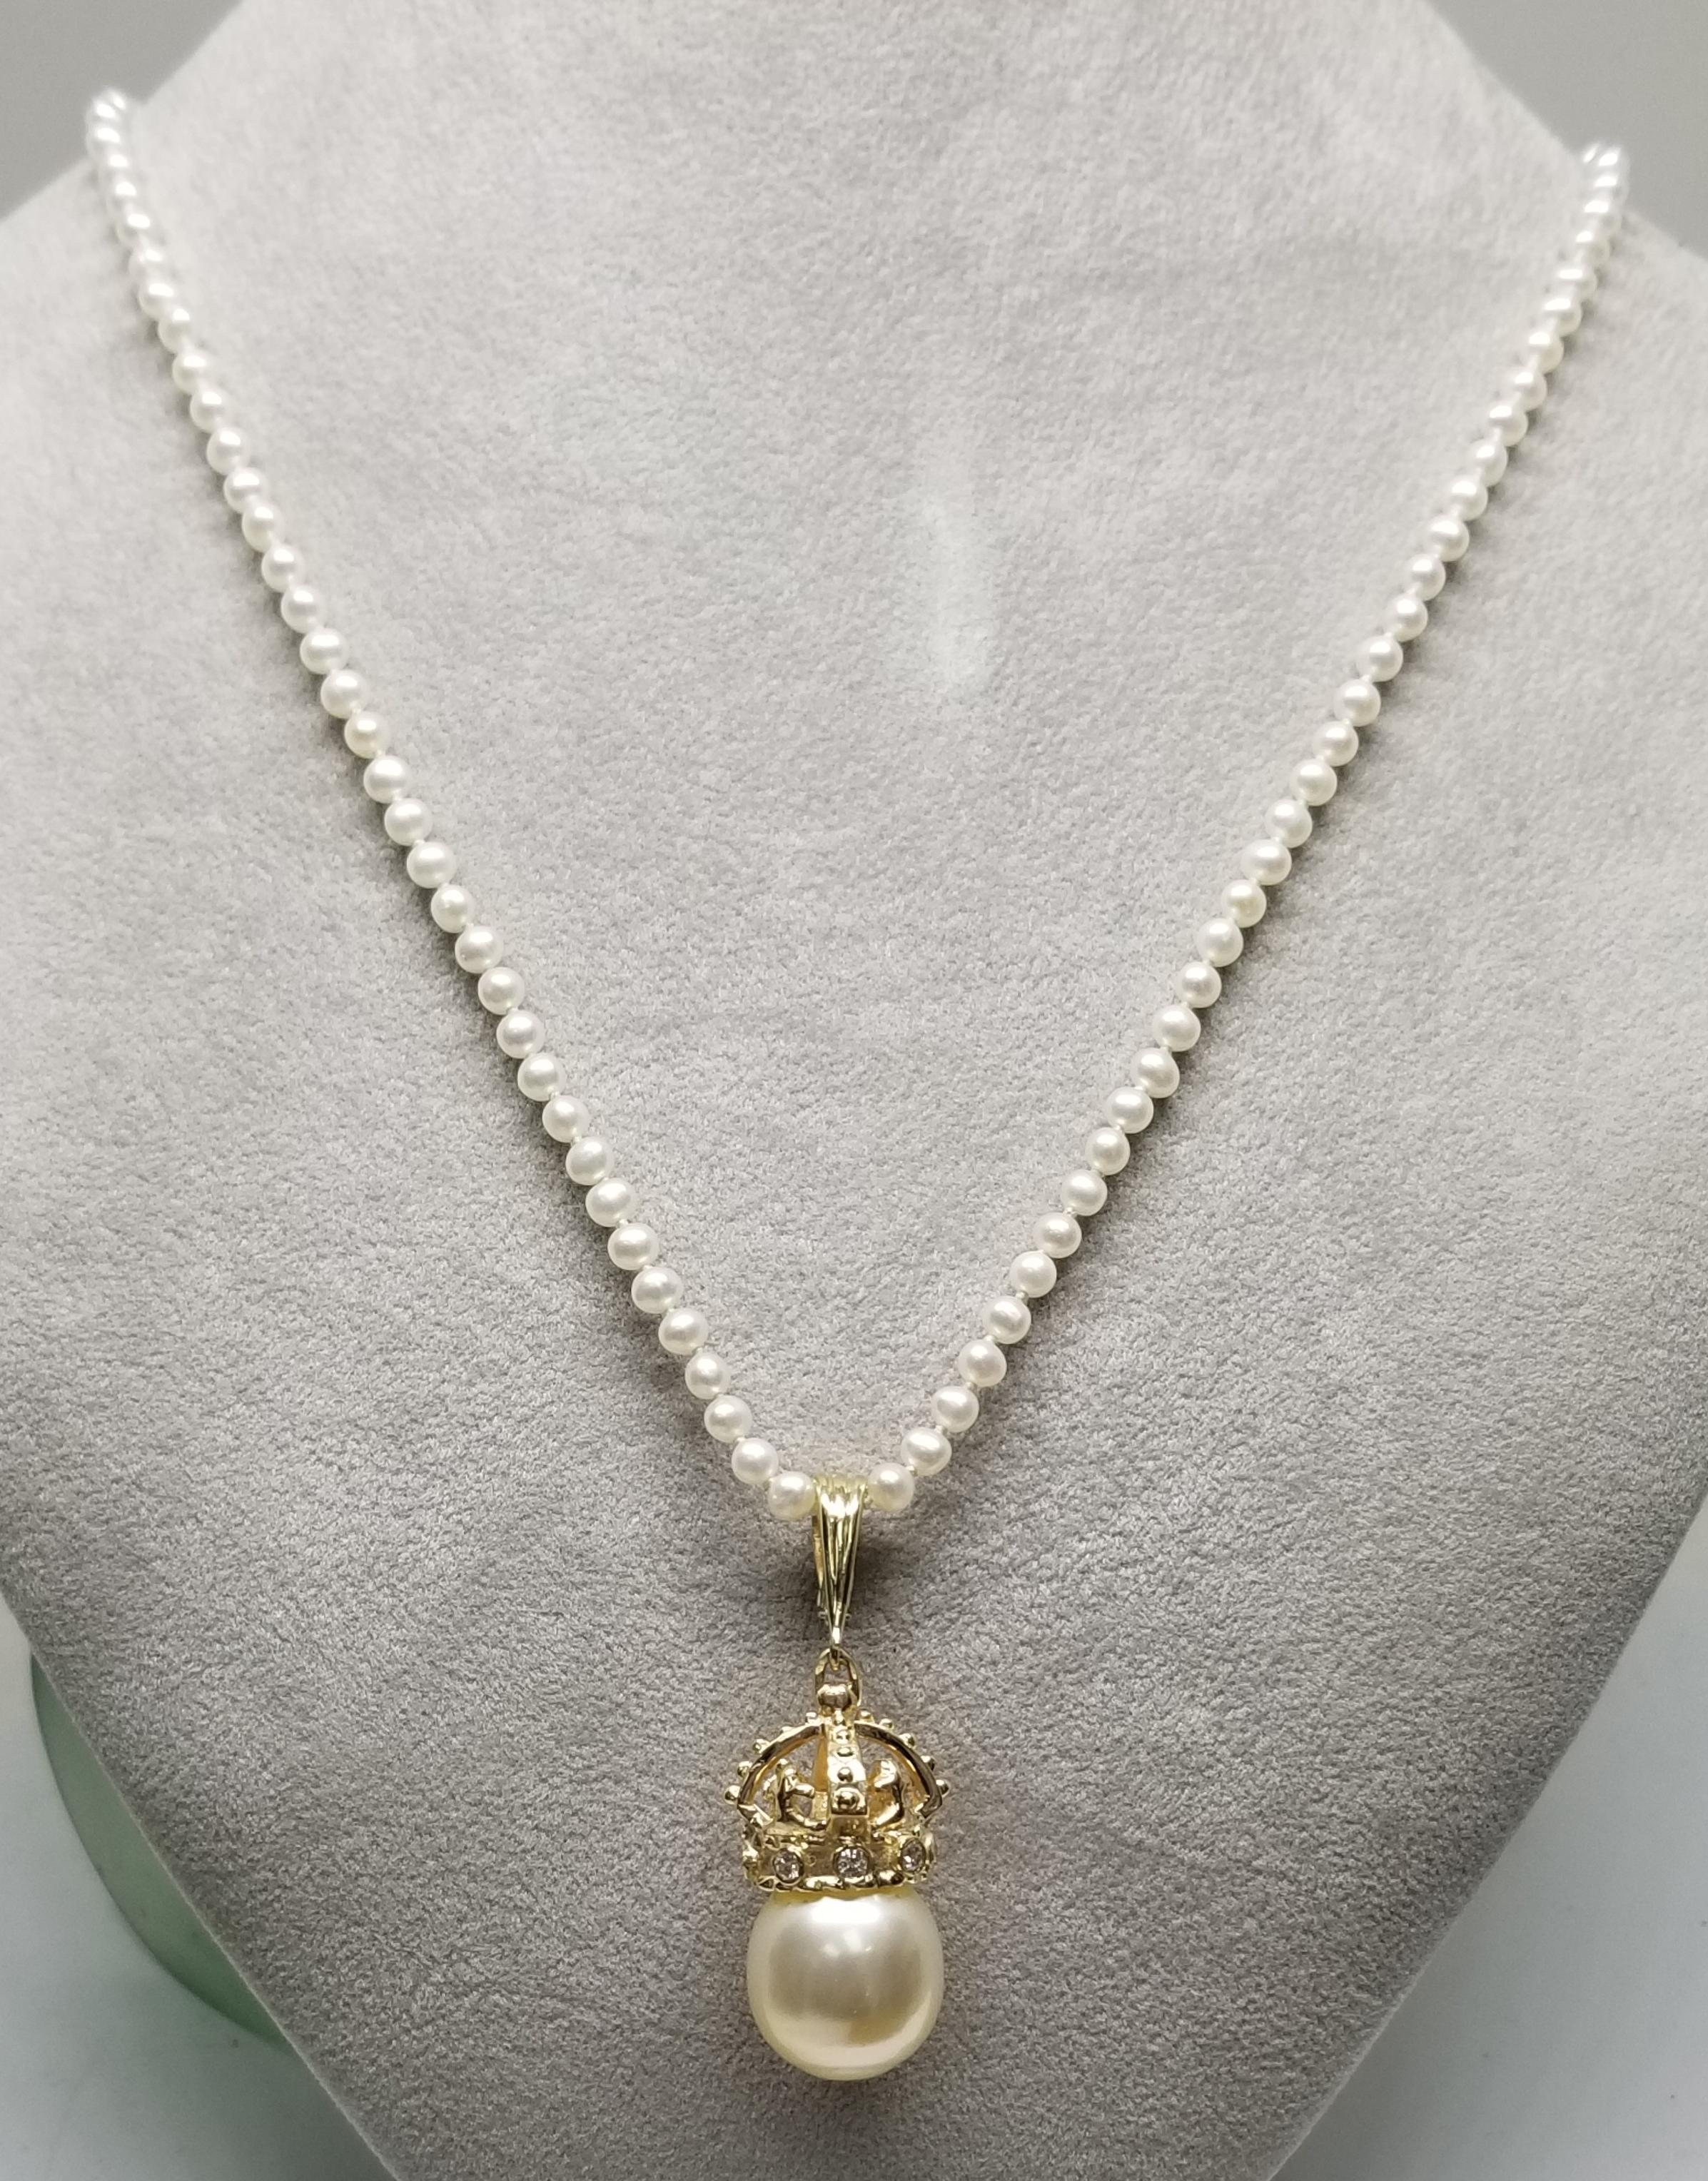 14k yellow gold crown with diamonds and south sea pearl pendant, containing 15mm south sea pearl and 8 round full cut diamonds; color 